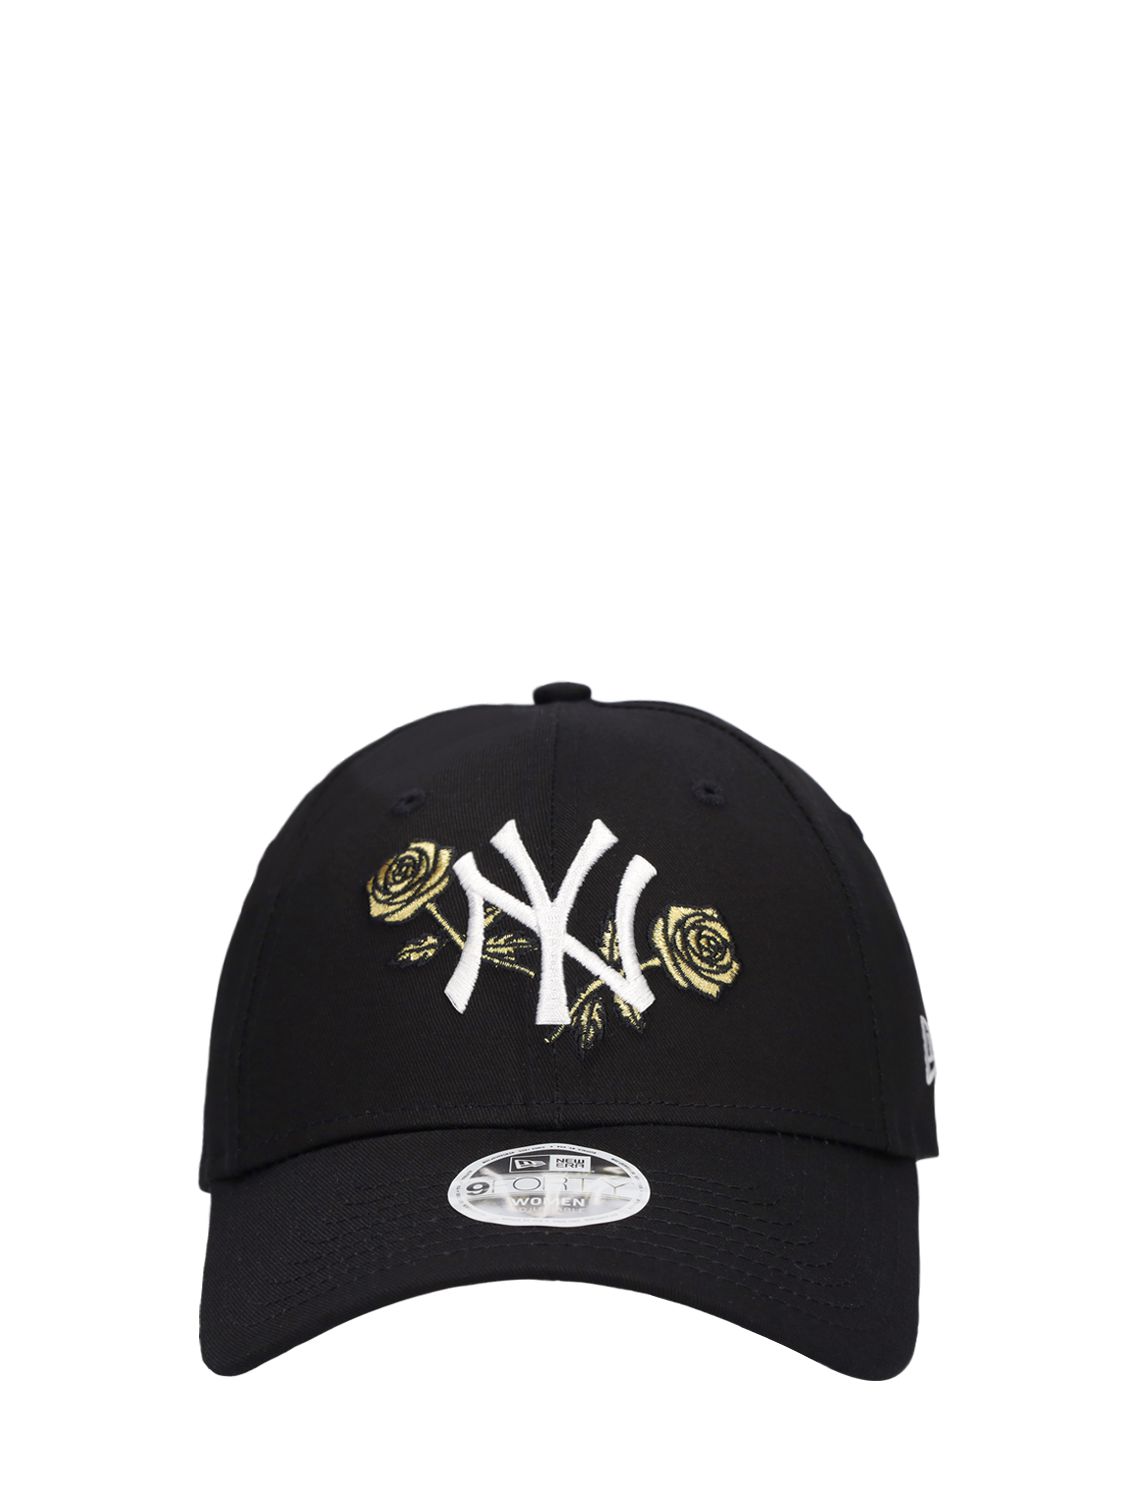 Ny Floral Metallic Embroidery 9forty Cap